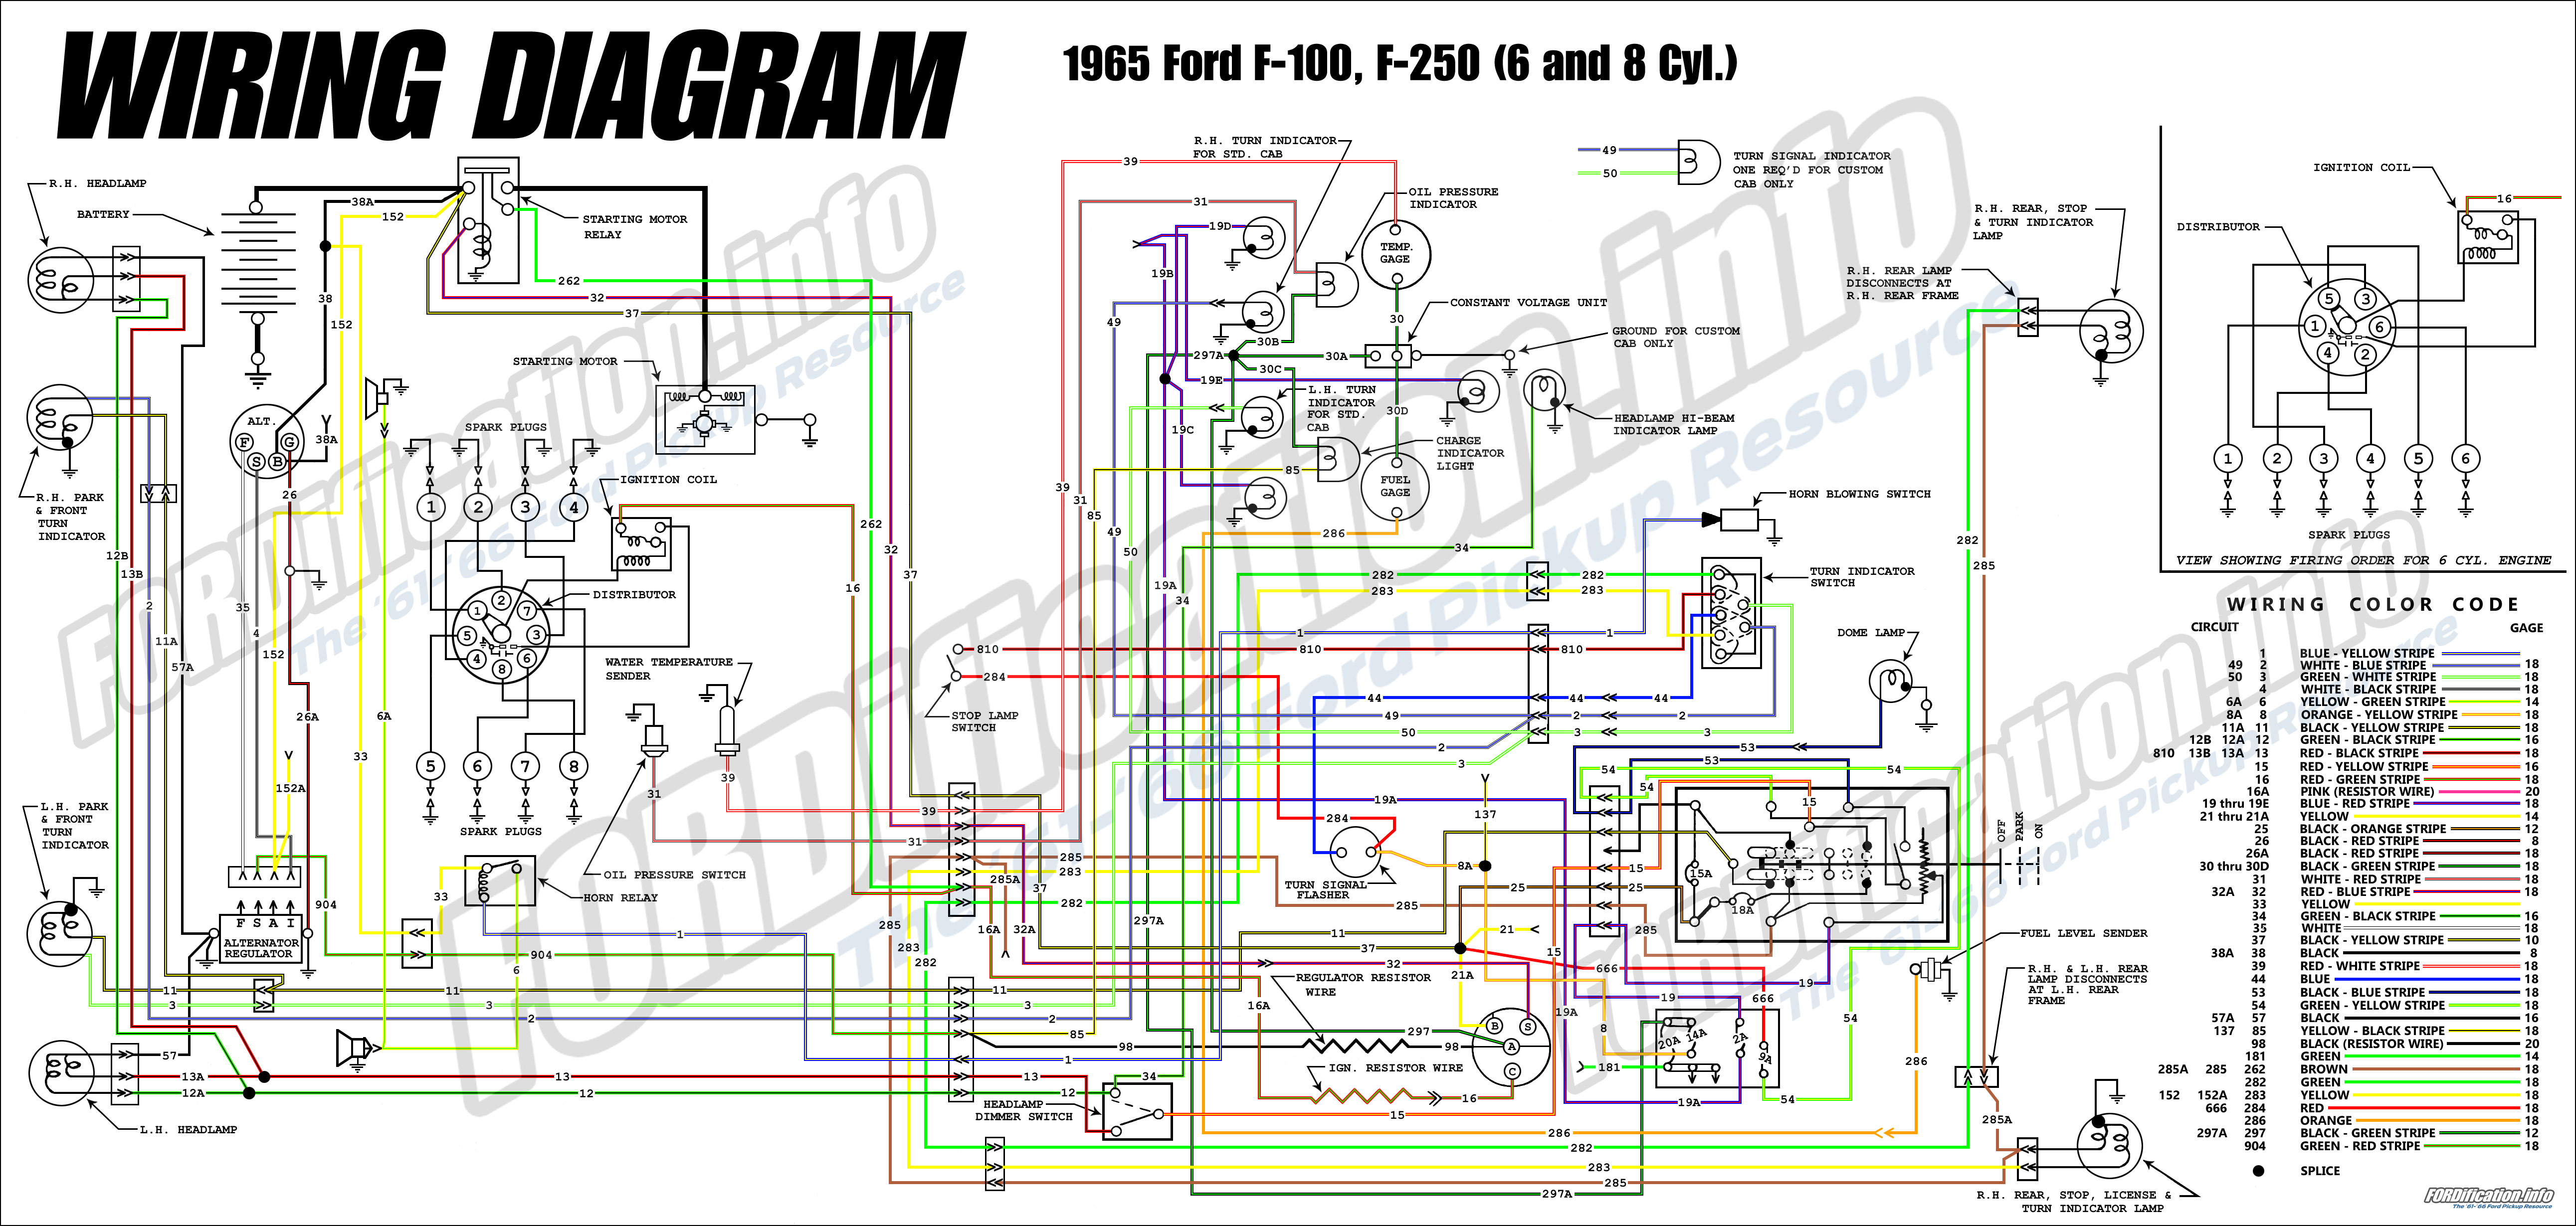 1965 Ford Truck Wiring Diagrams - FORDification.info - The '61-'66 Ford  Pickup Resource  Wiring Diagram 59 Ford    FORDification.info